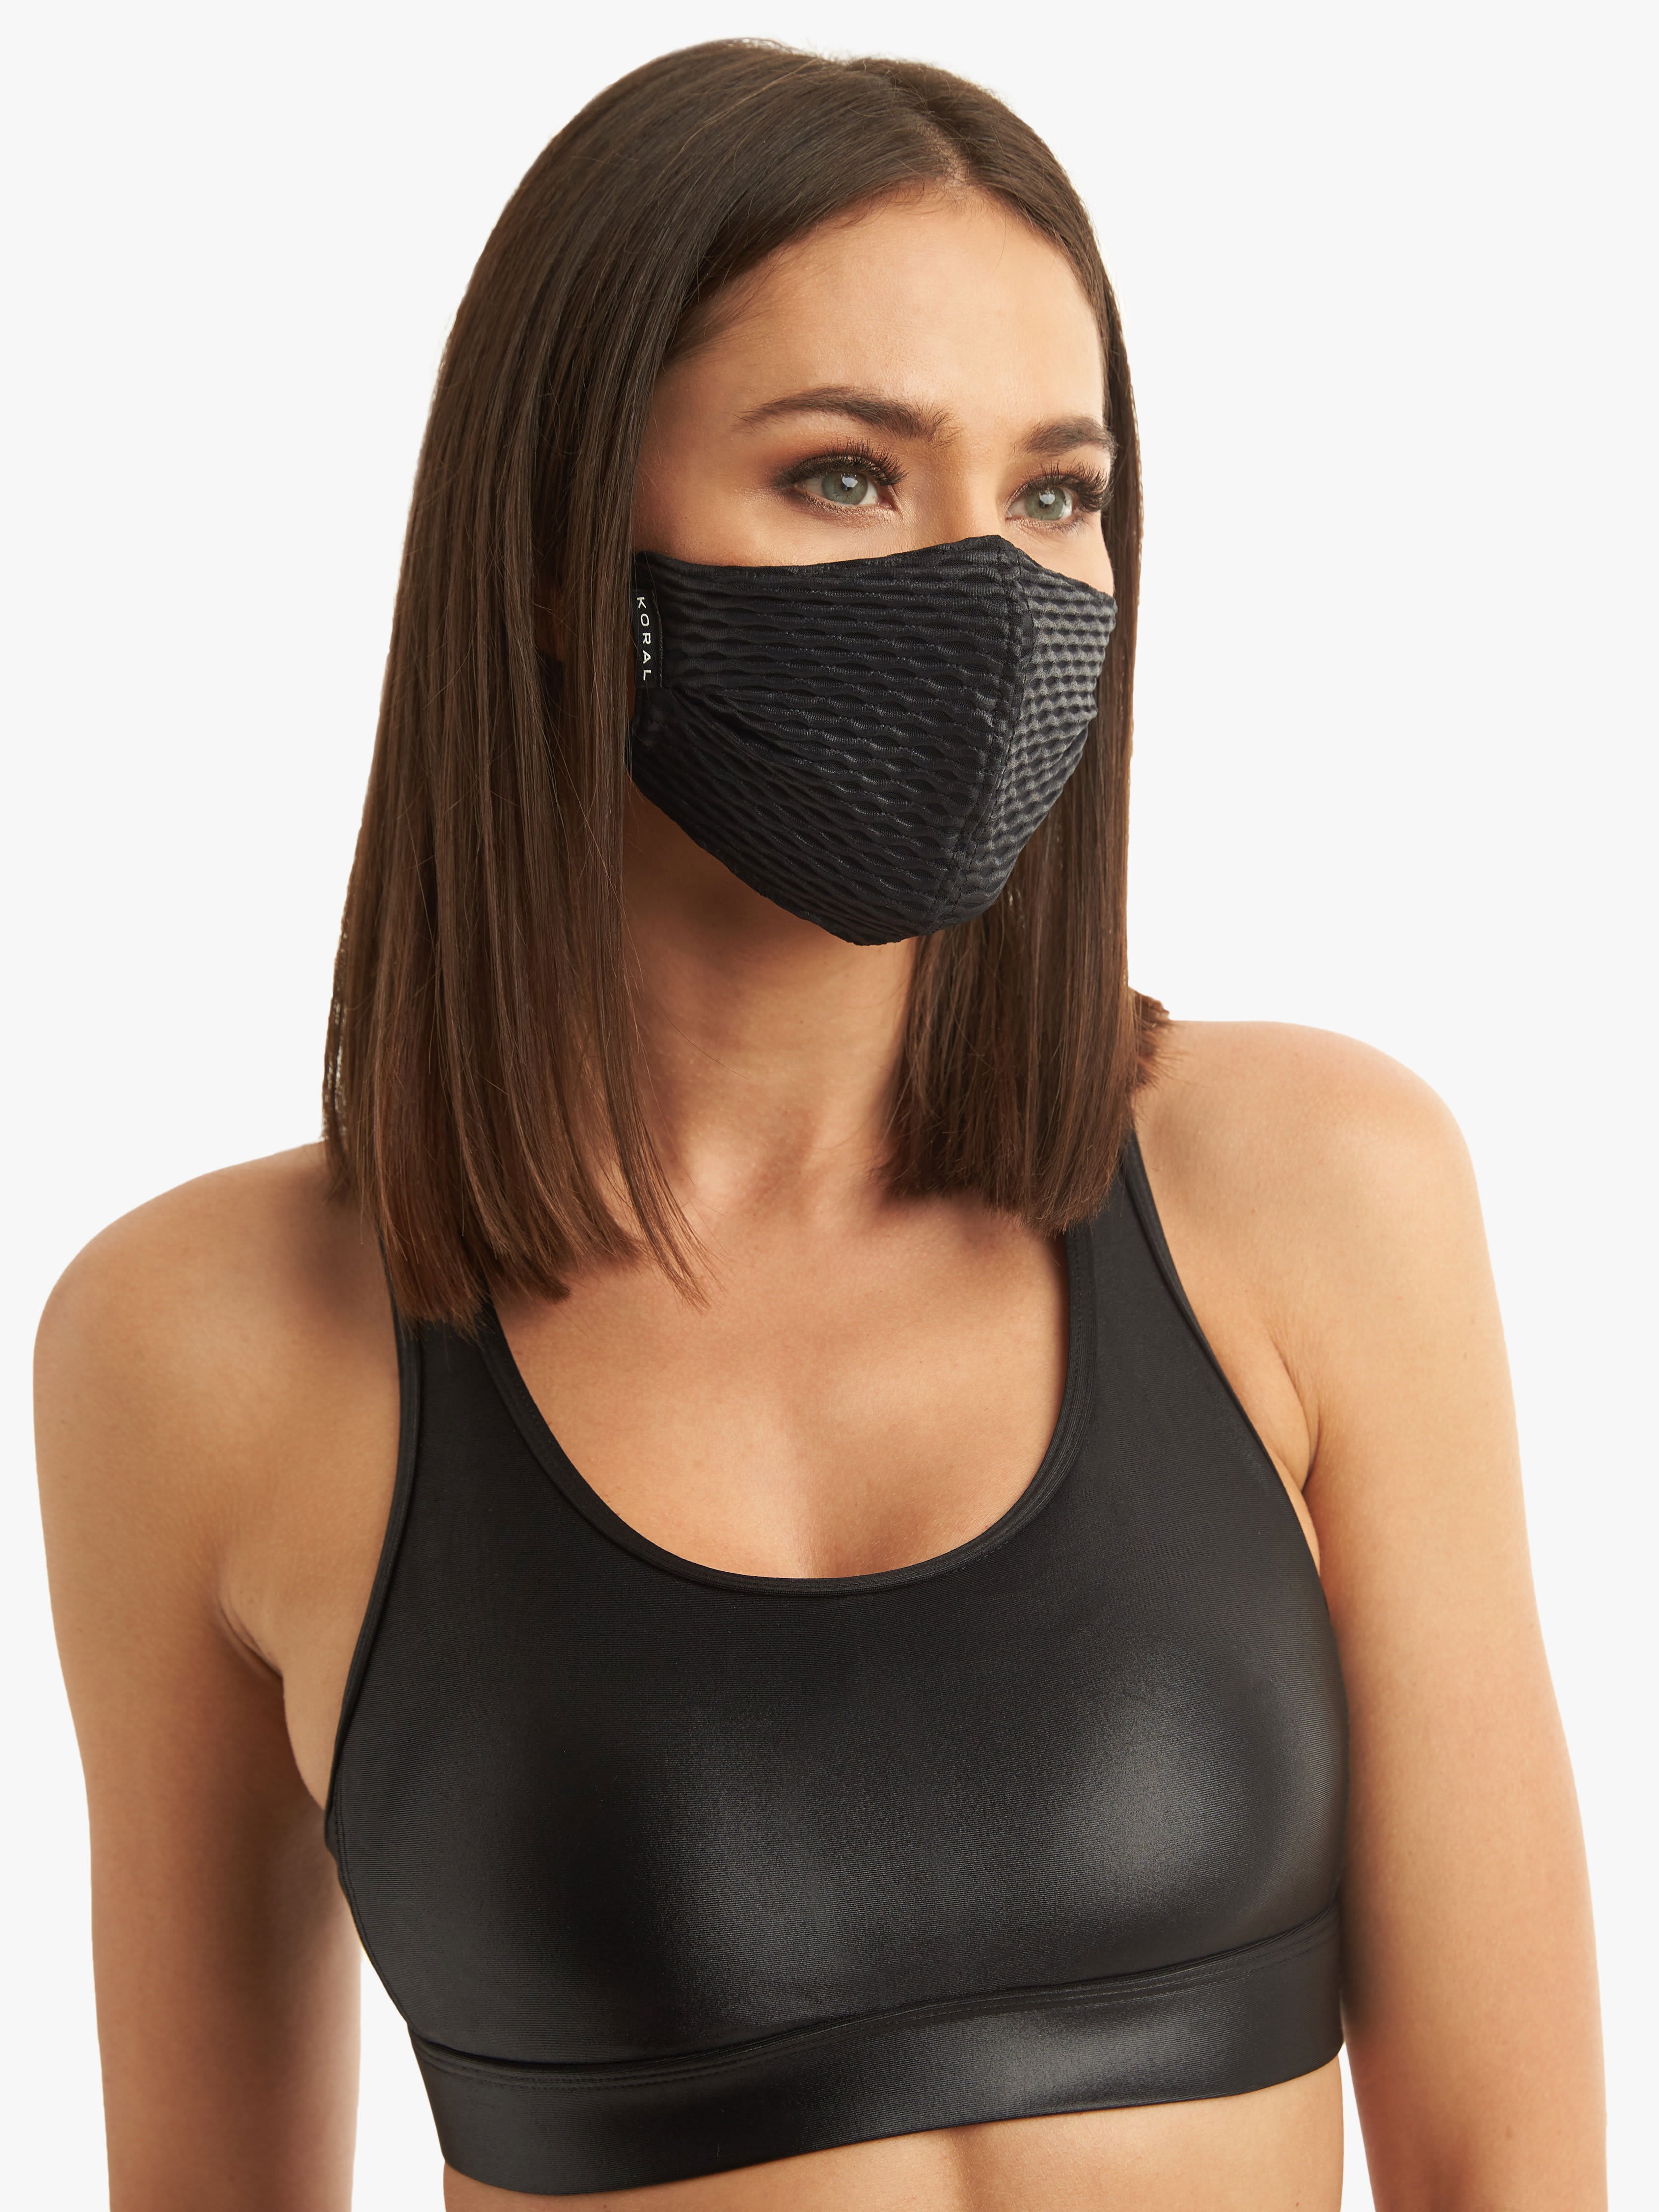 Face Masks for Running, Biking,and Other Workouts - Lulus.com Fashion Blog